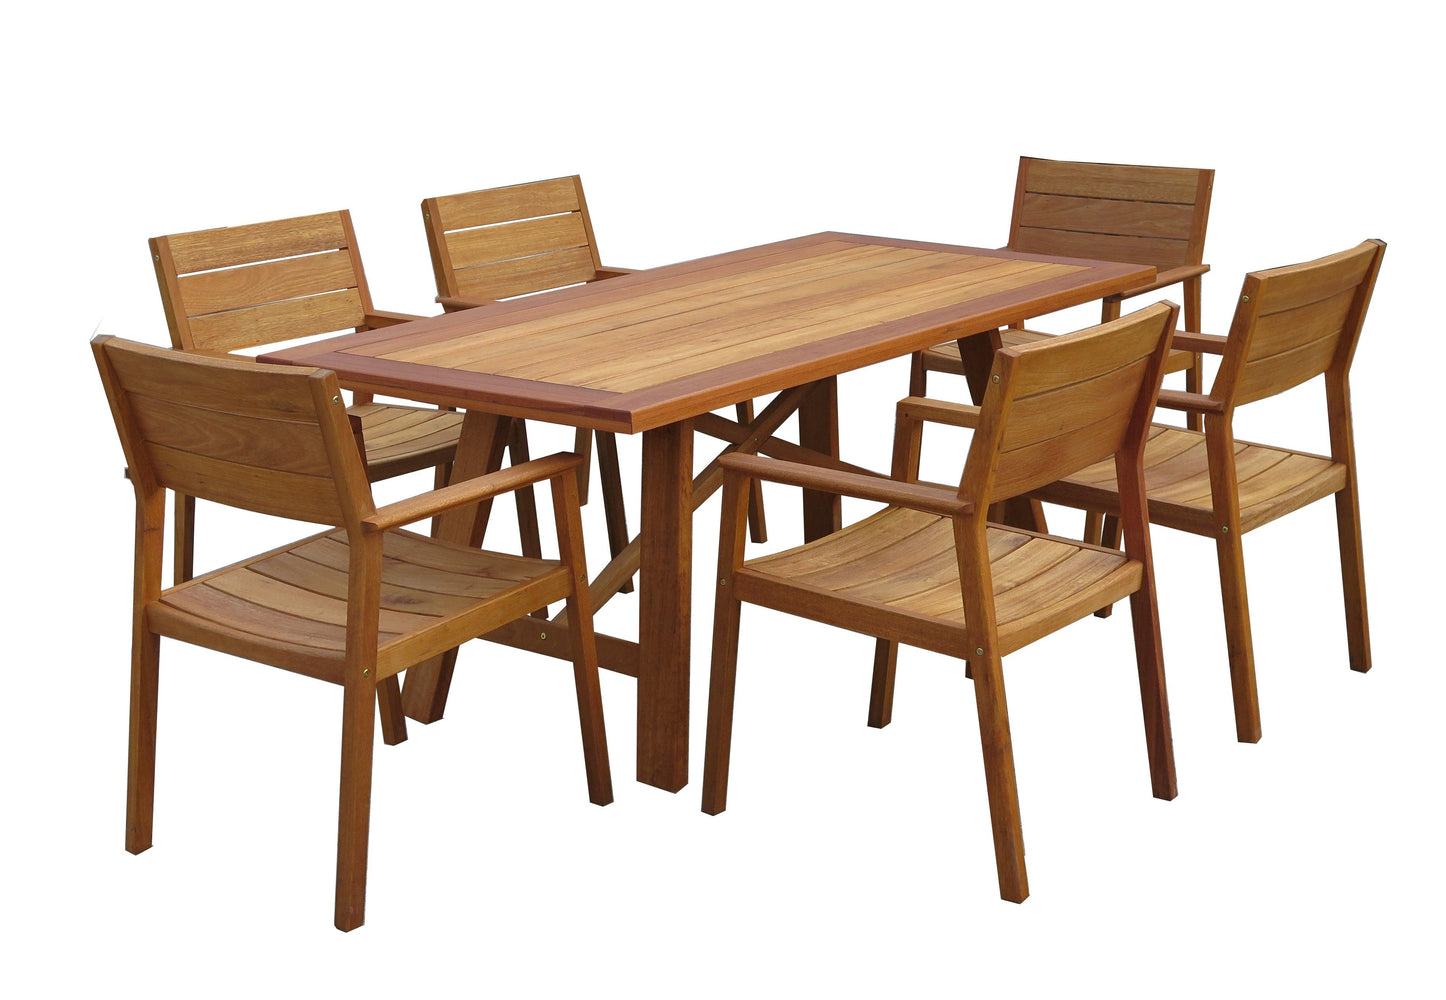 Fremantle 6 Seat Outdoor Dining Setting - Bare Outdoors